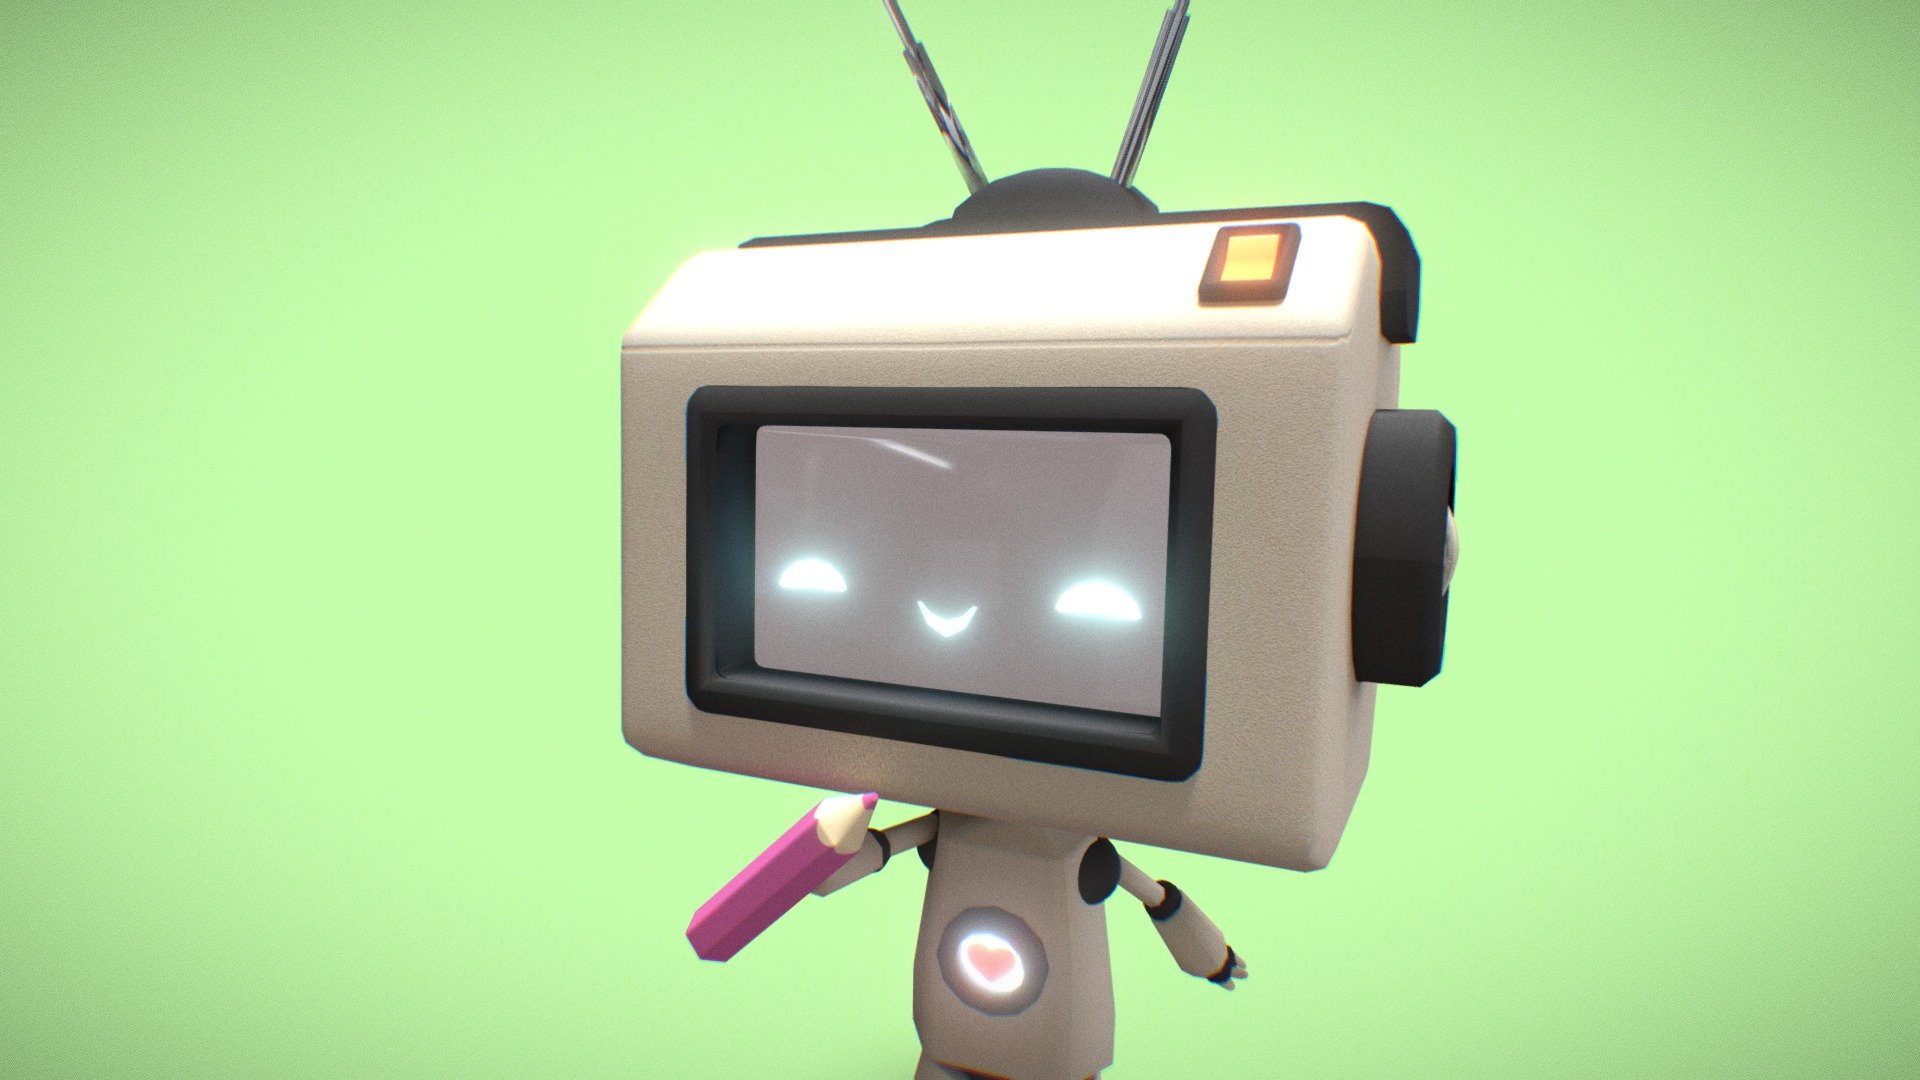 My entry to the Cute Robot Challenge. It has some Gameboy / modempunk vibes. a Chibi robot. Made with Blender 3d model